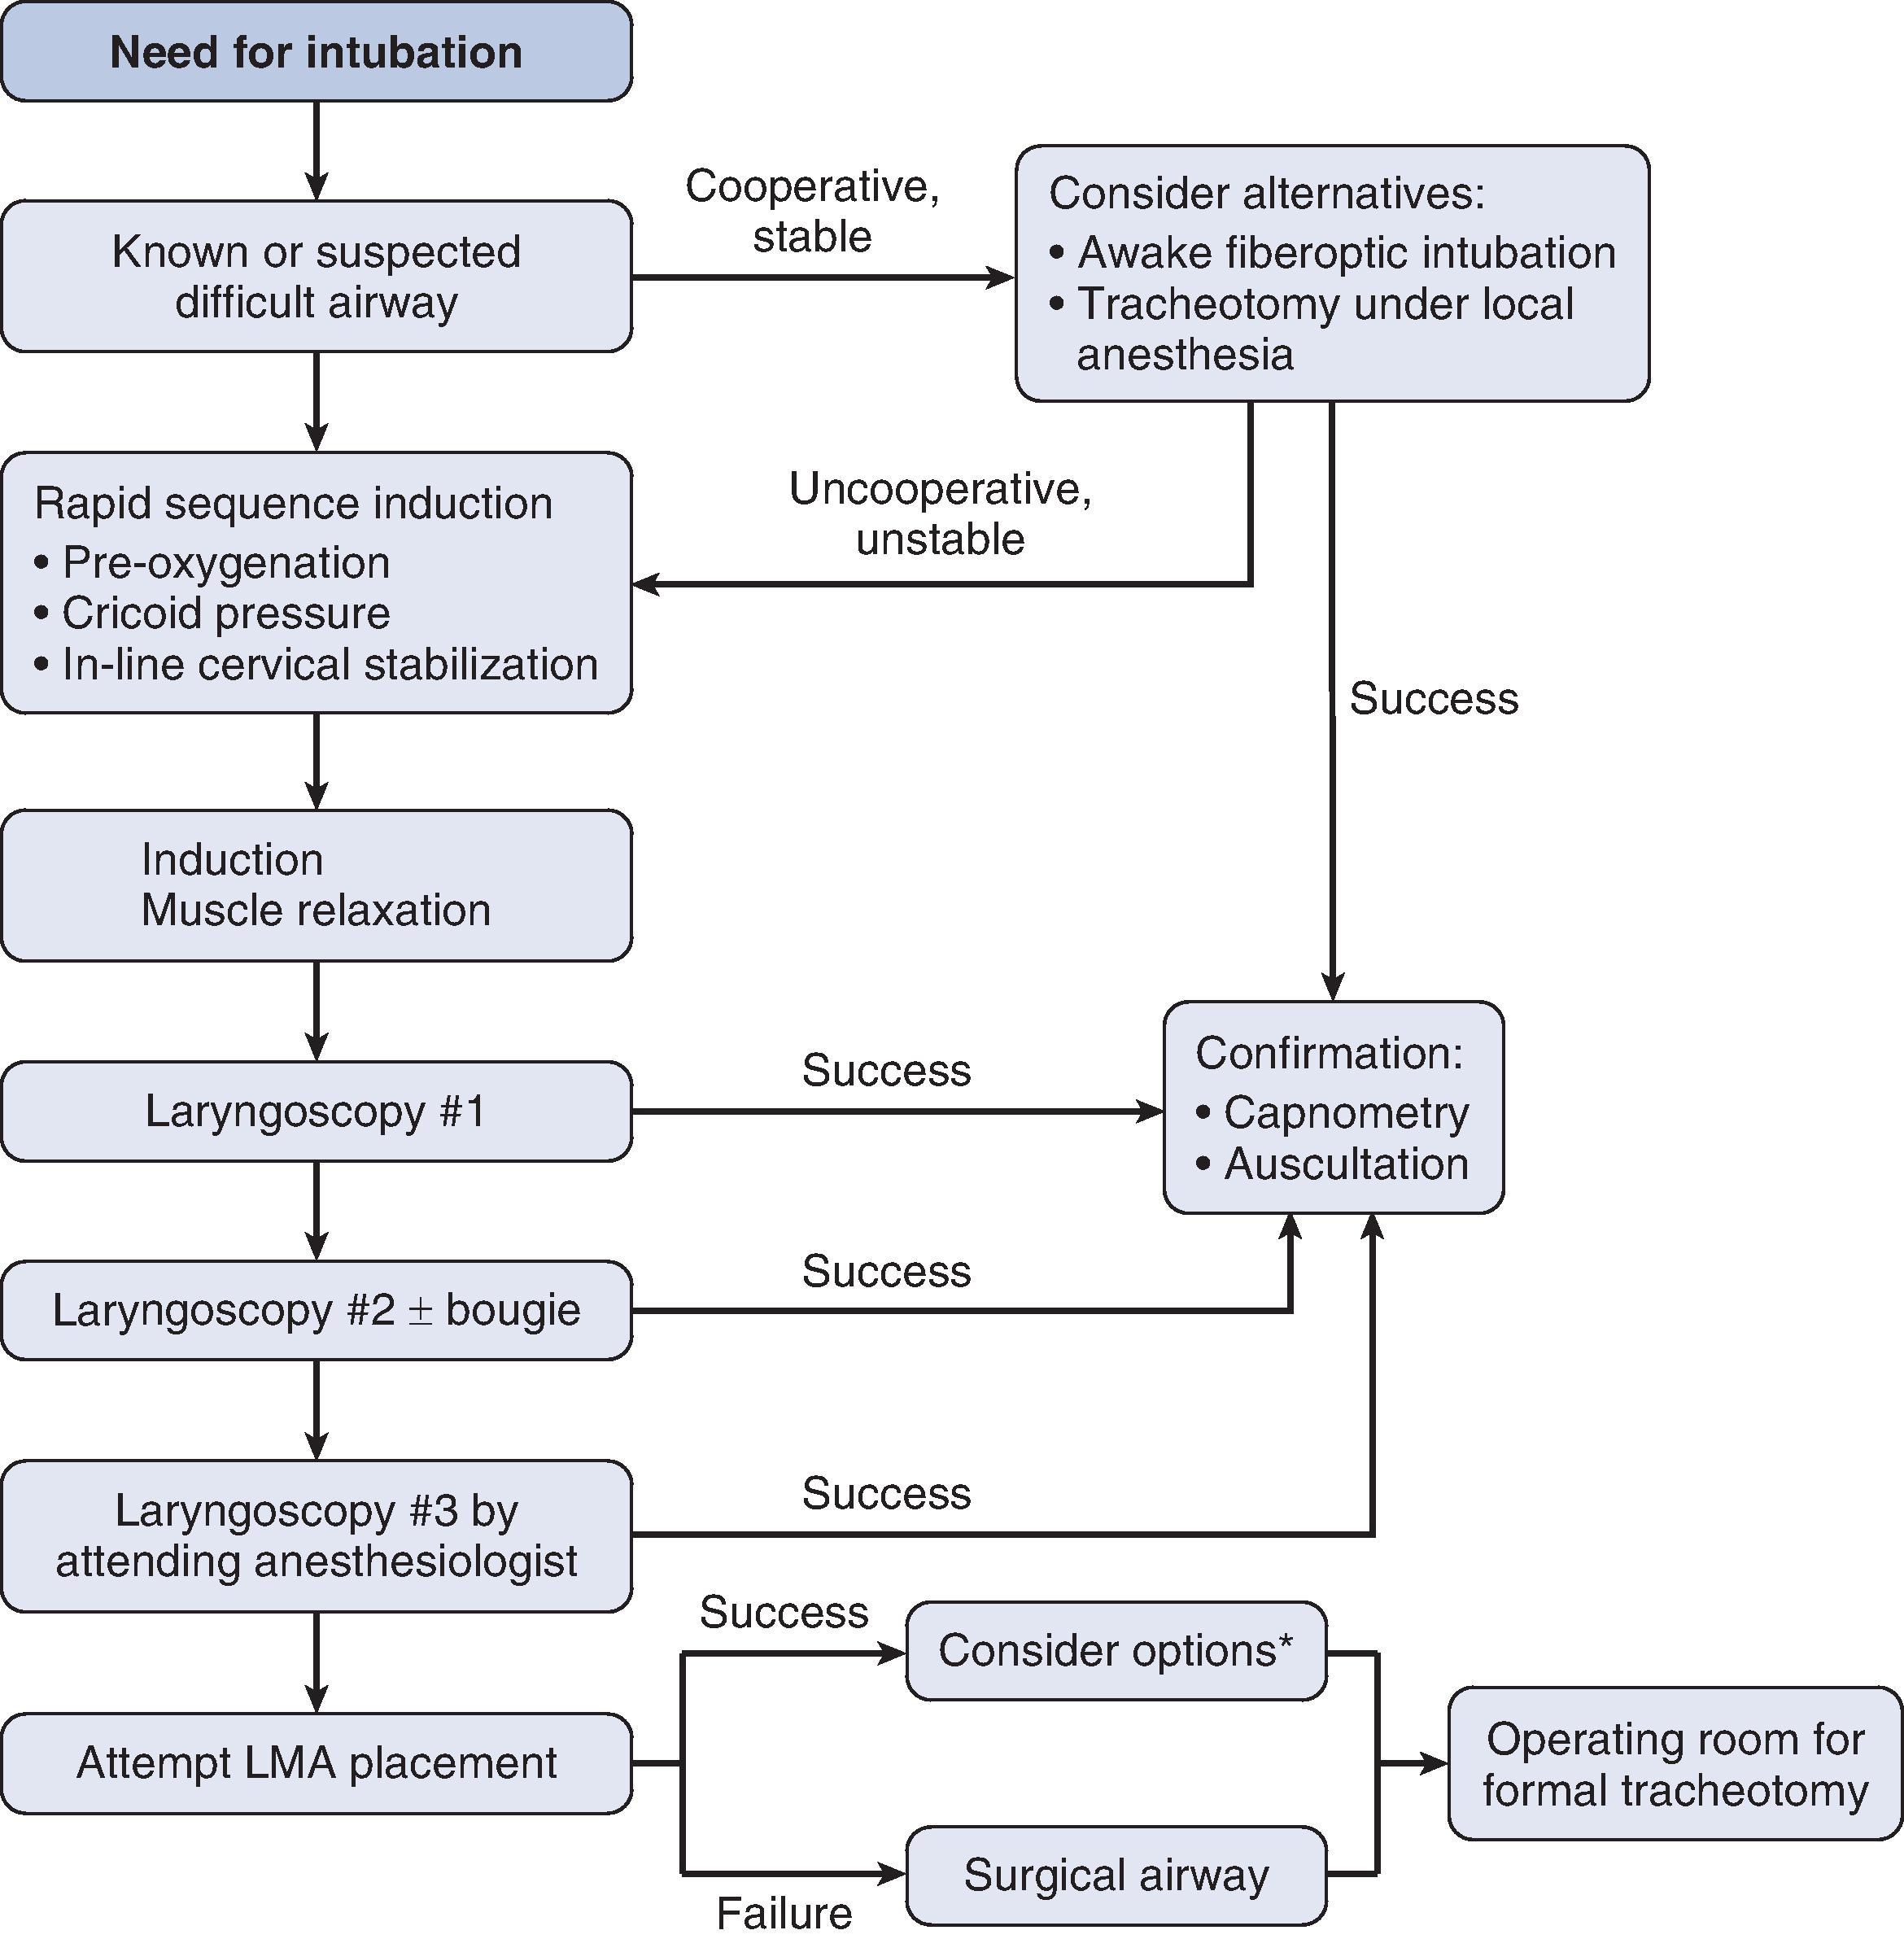 FIG. 6, Airway management algorithm at the R Adams Cowley Shock Trauma Center. Laryngoscopy may include the use of a video laryngoscope such as the GlideScope or Ranger (Verathon, Bothell, Washington) at multiple steps.